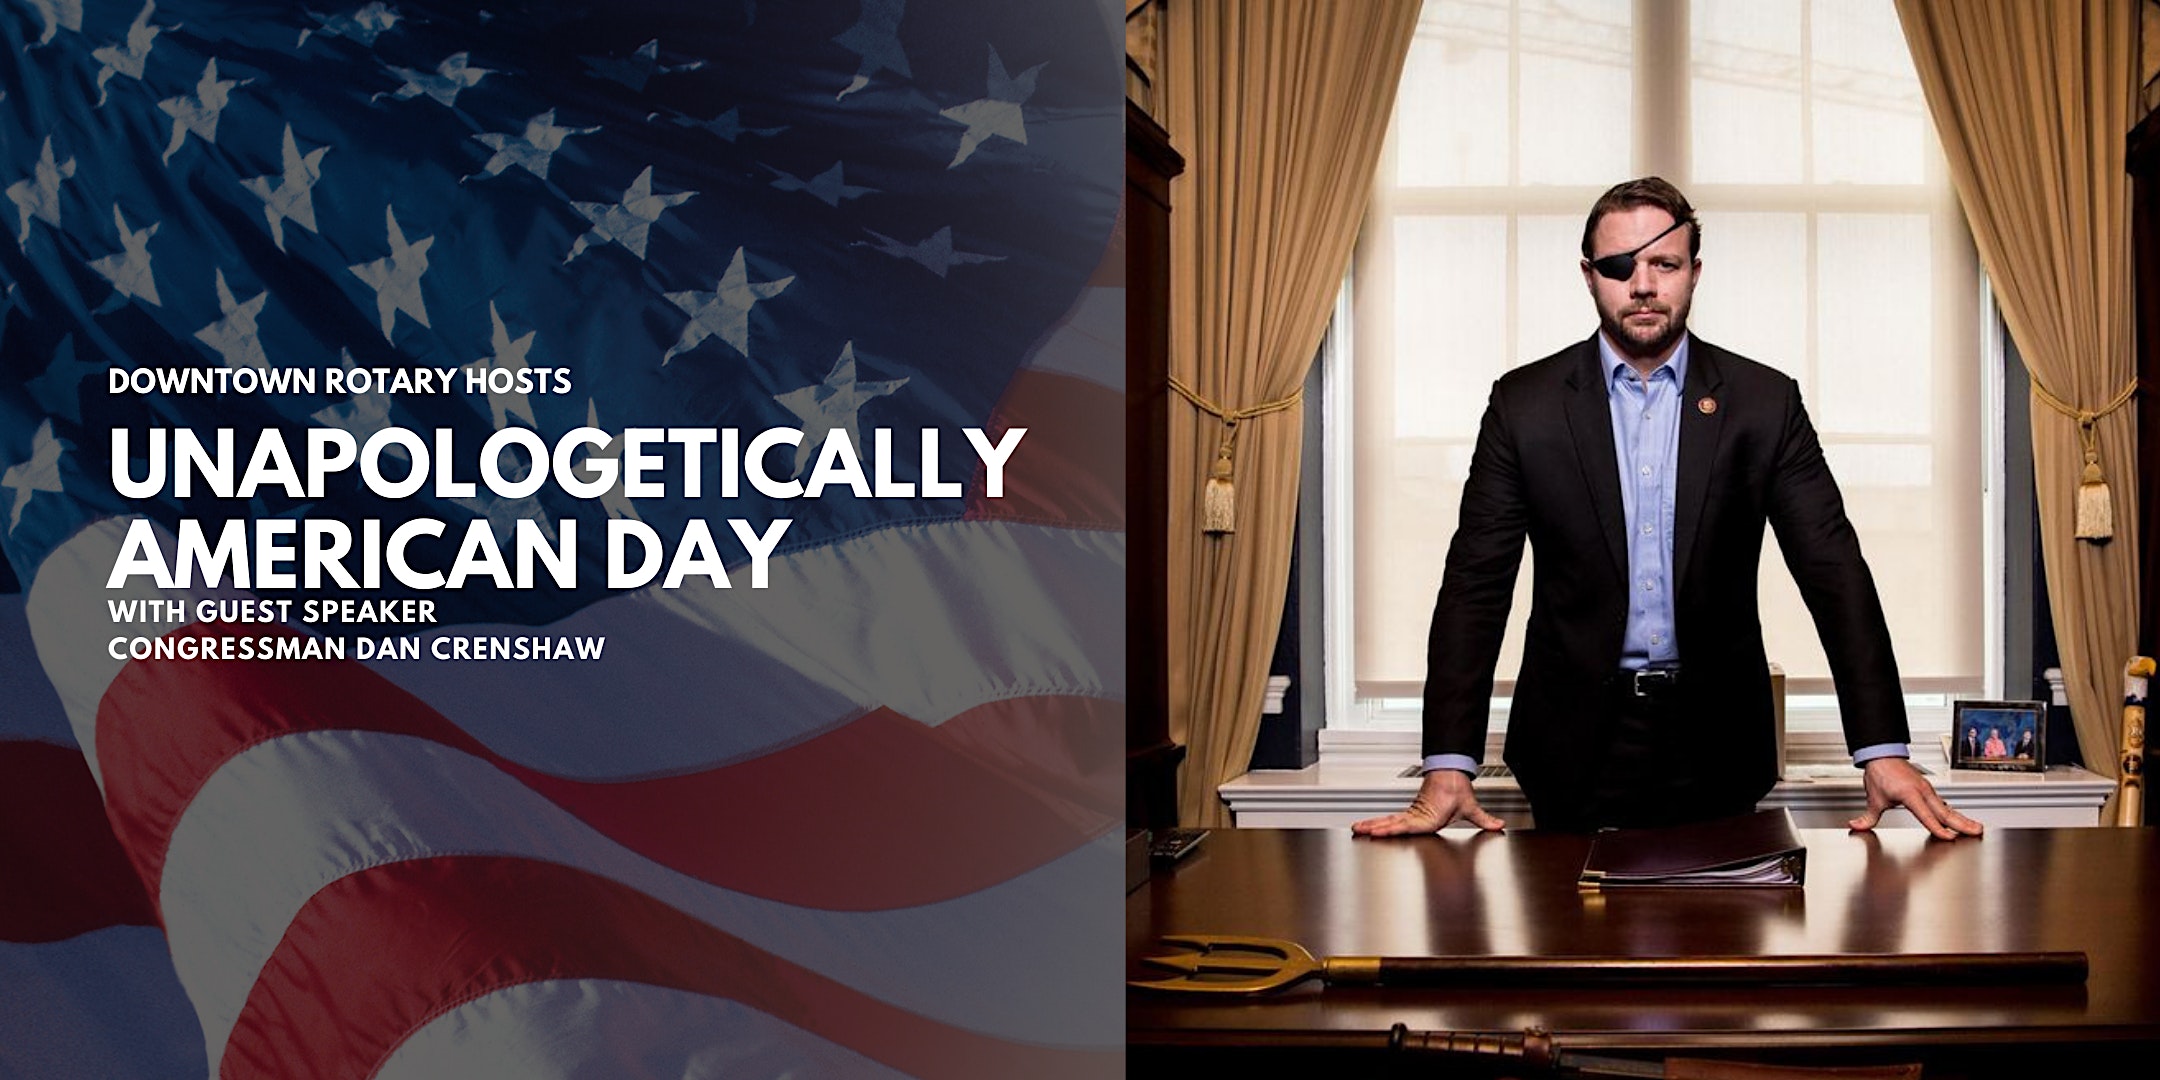 Unapologetically American Day Luncheon With Guest Congressman Dan Crenshaw